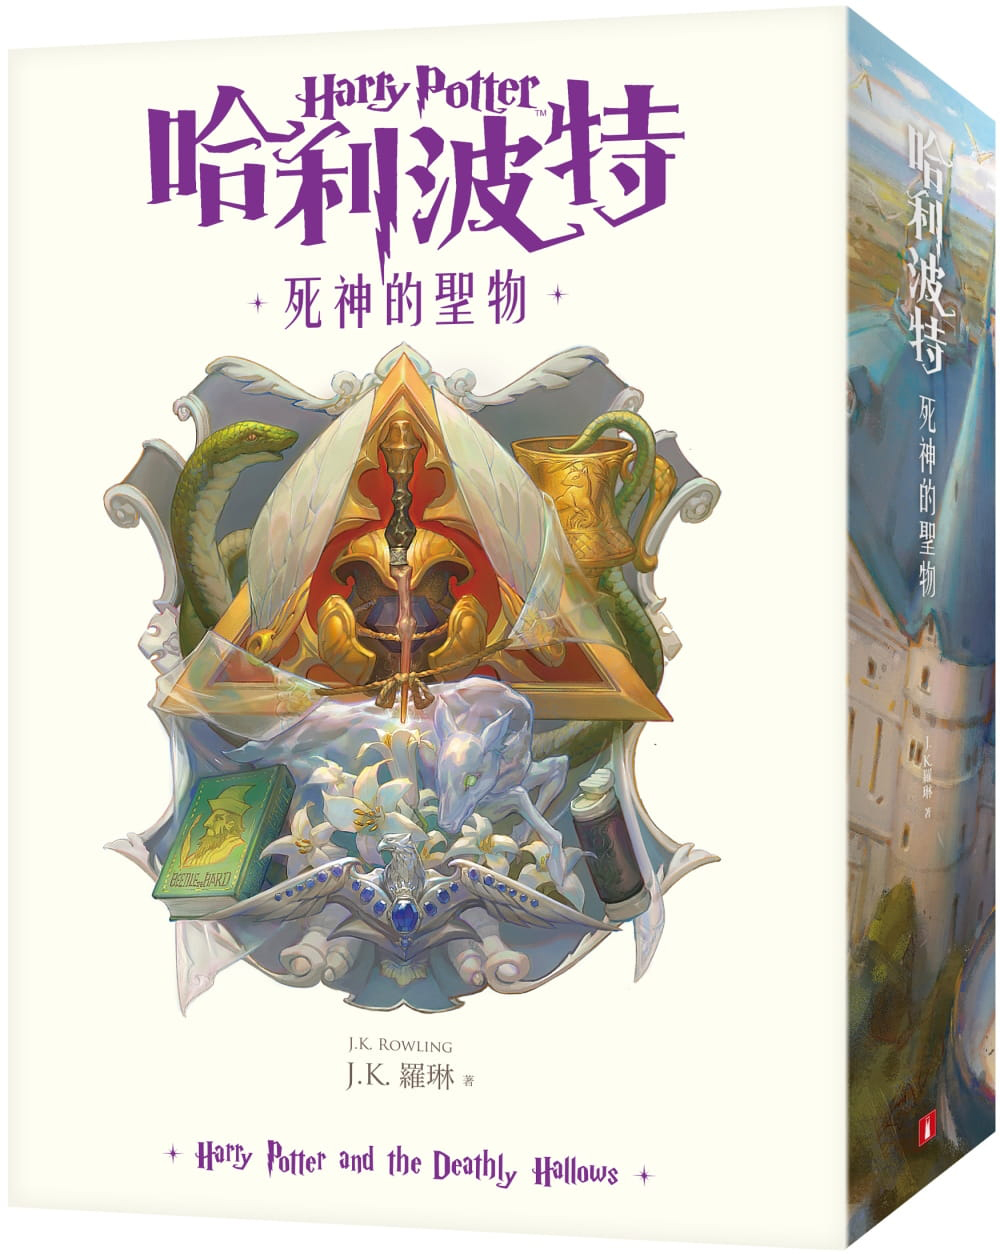 ‘Deathly Hallows’ Traditional Chinese 20th anniversary edition